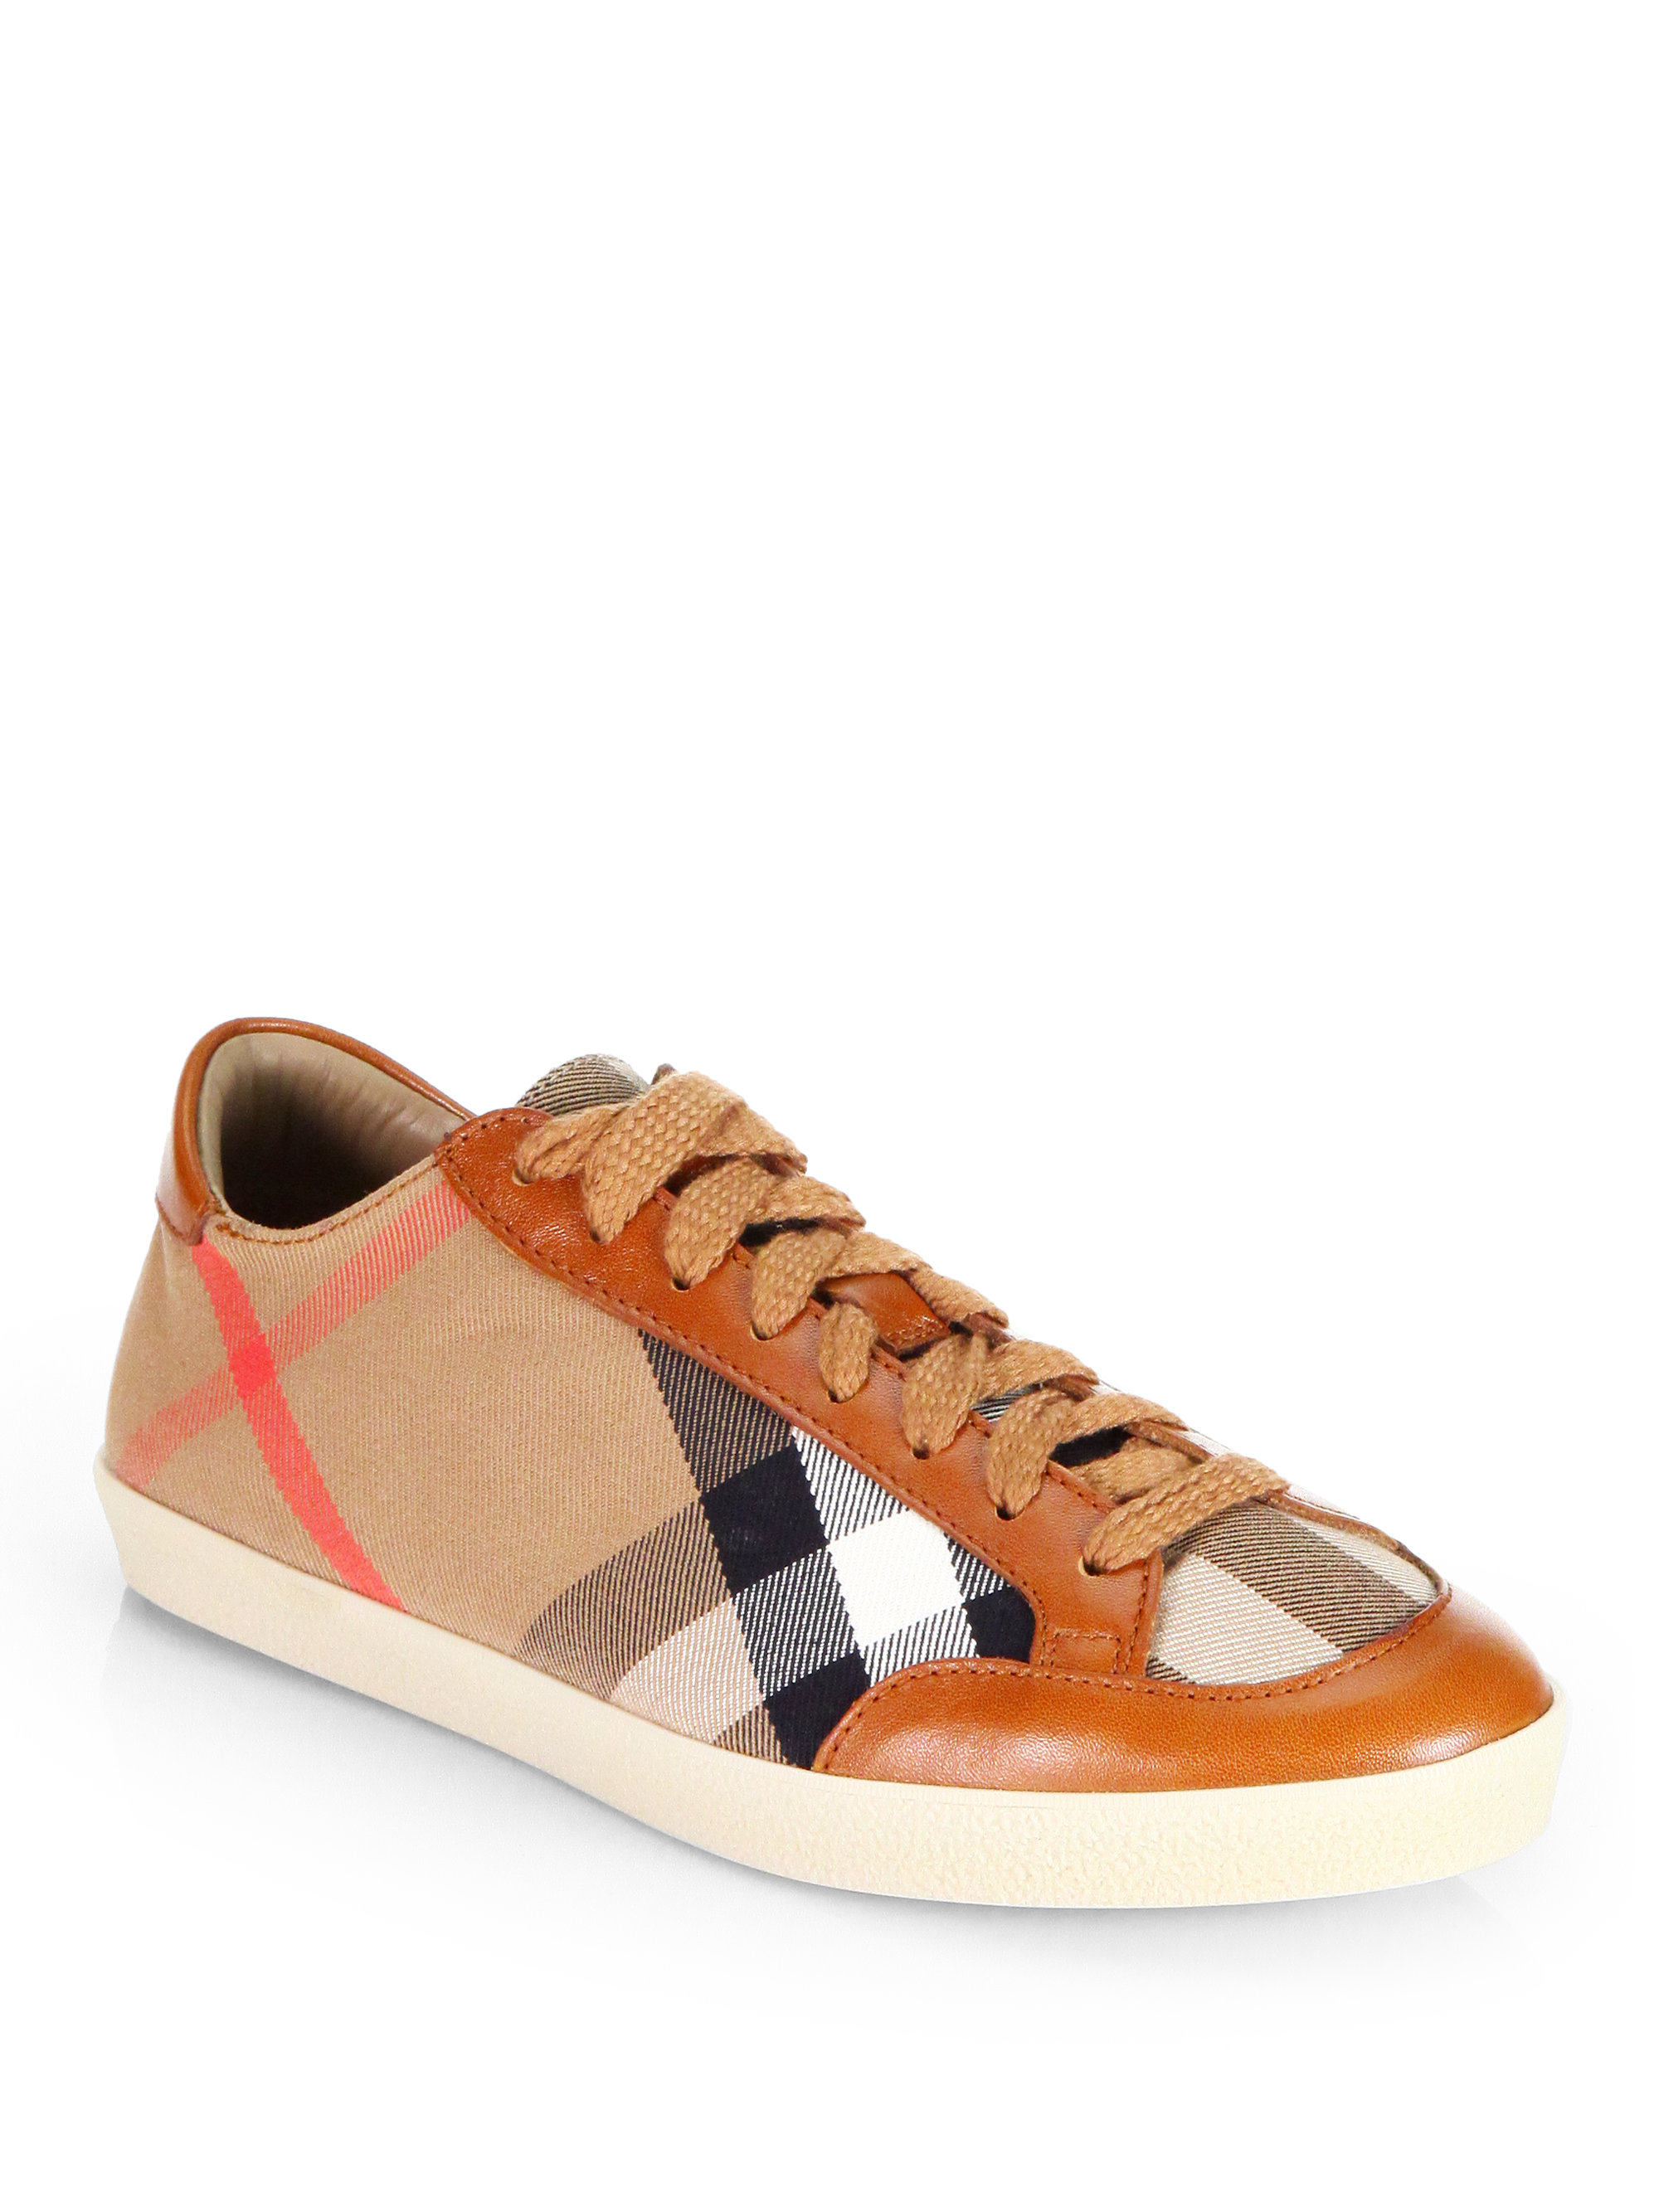 Burberry Hartfield Check Canvas Leather 